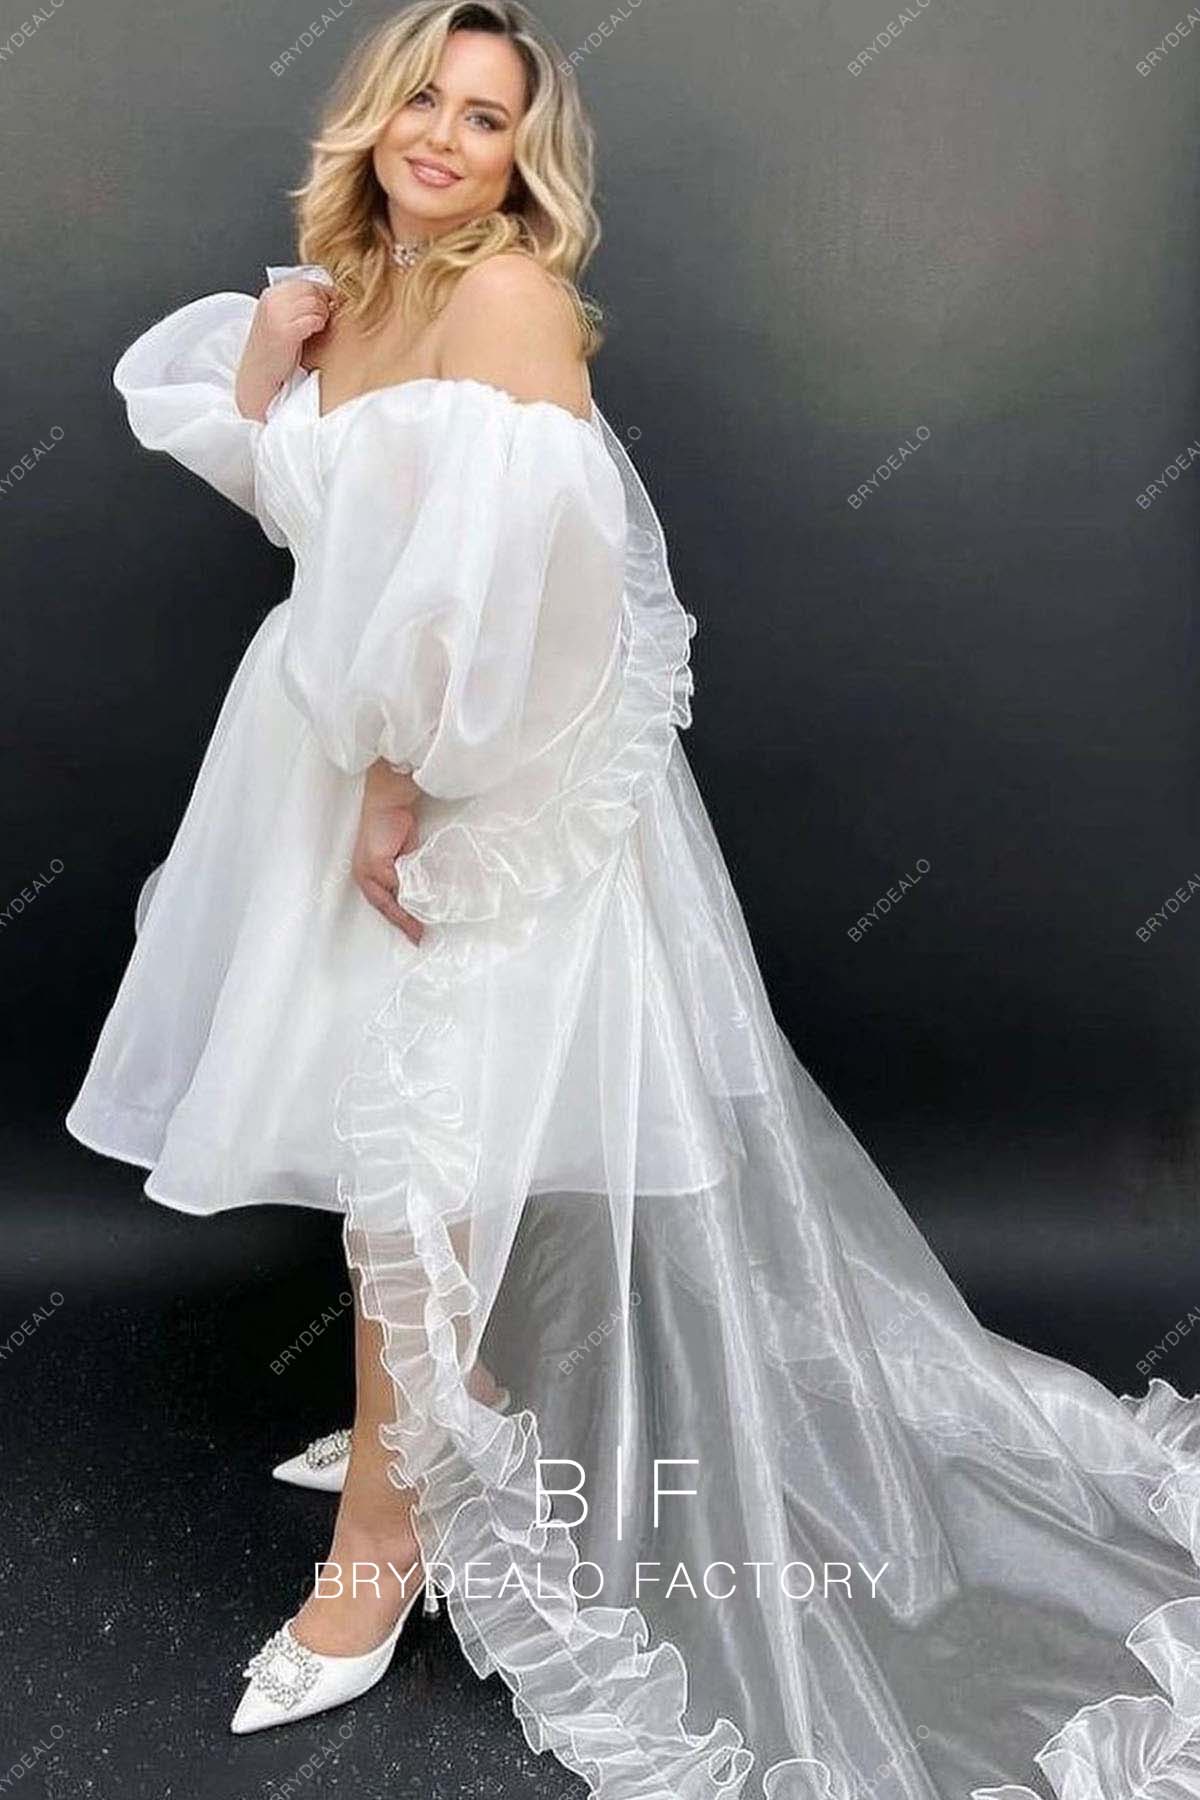 Off Shoulder Casual Knee Length Long Sleeve Bridal Gown